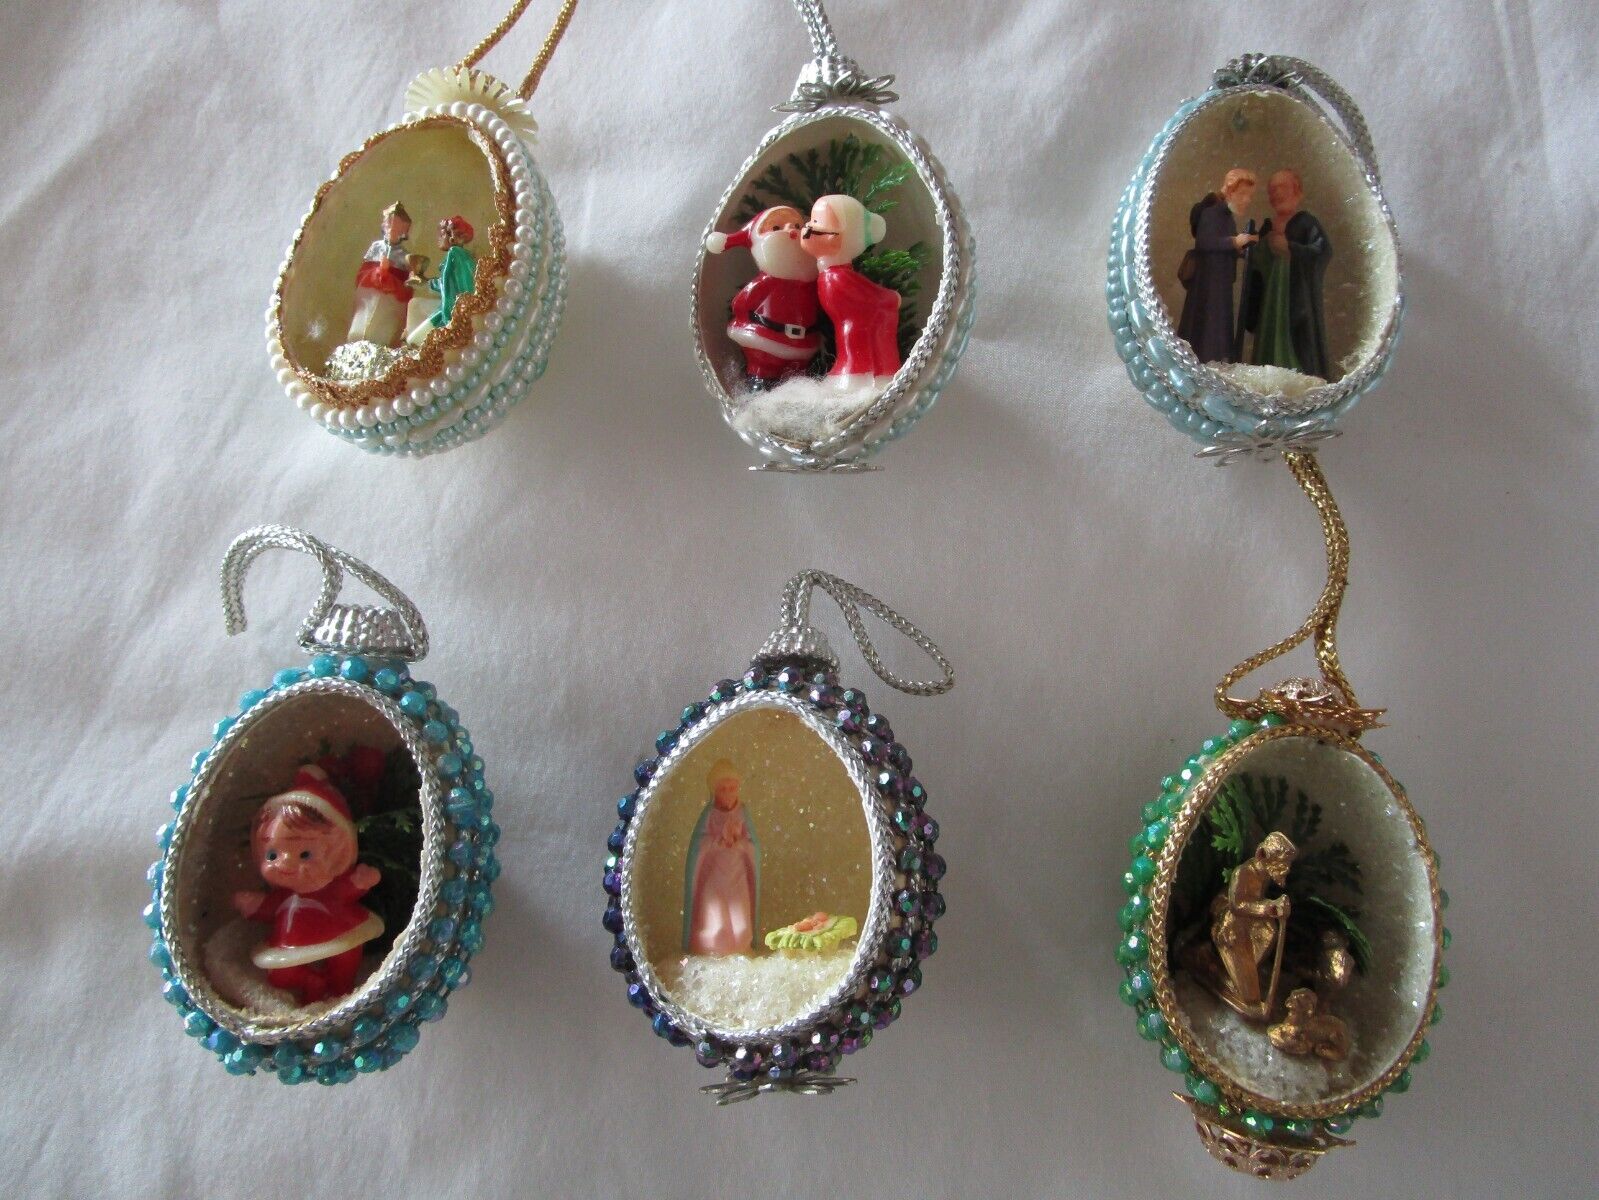 Set 6 Eggshell Diorama Christmas Ornaments Beaded Flocked Handcrafted 1950s